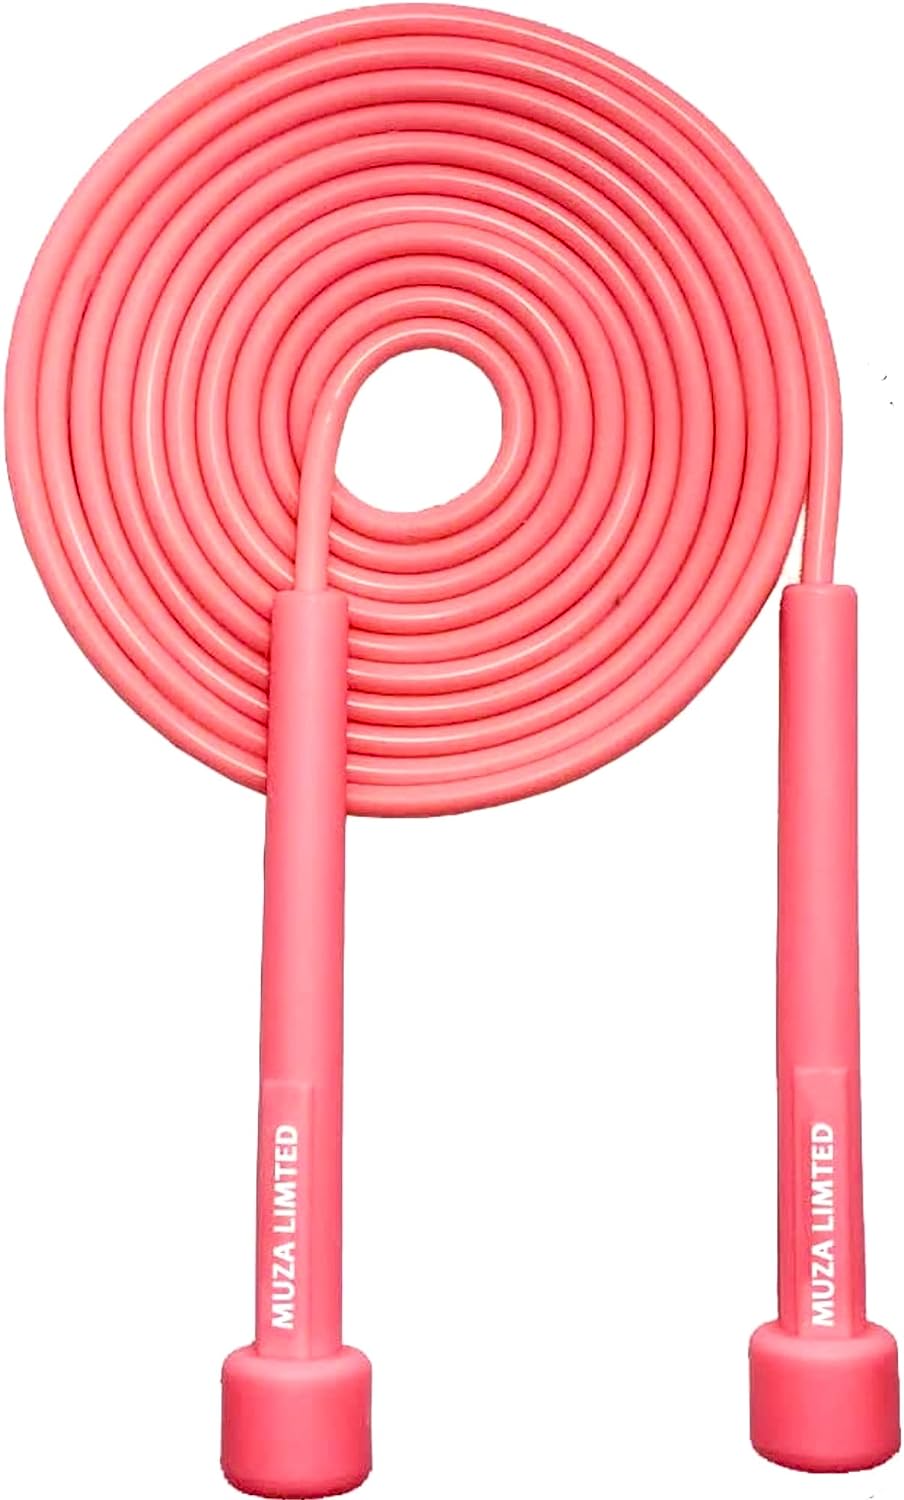 Muza Skipping rope adult for Home Exercise  Body Fitness men, women and kids | speed jumping rope with non slip handle | Adjustable skipping rope for Fitness, Crossfit and MMA (Pink)